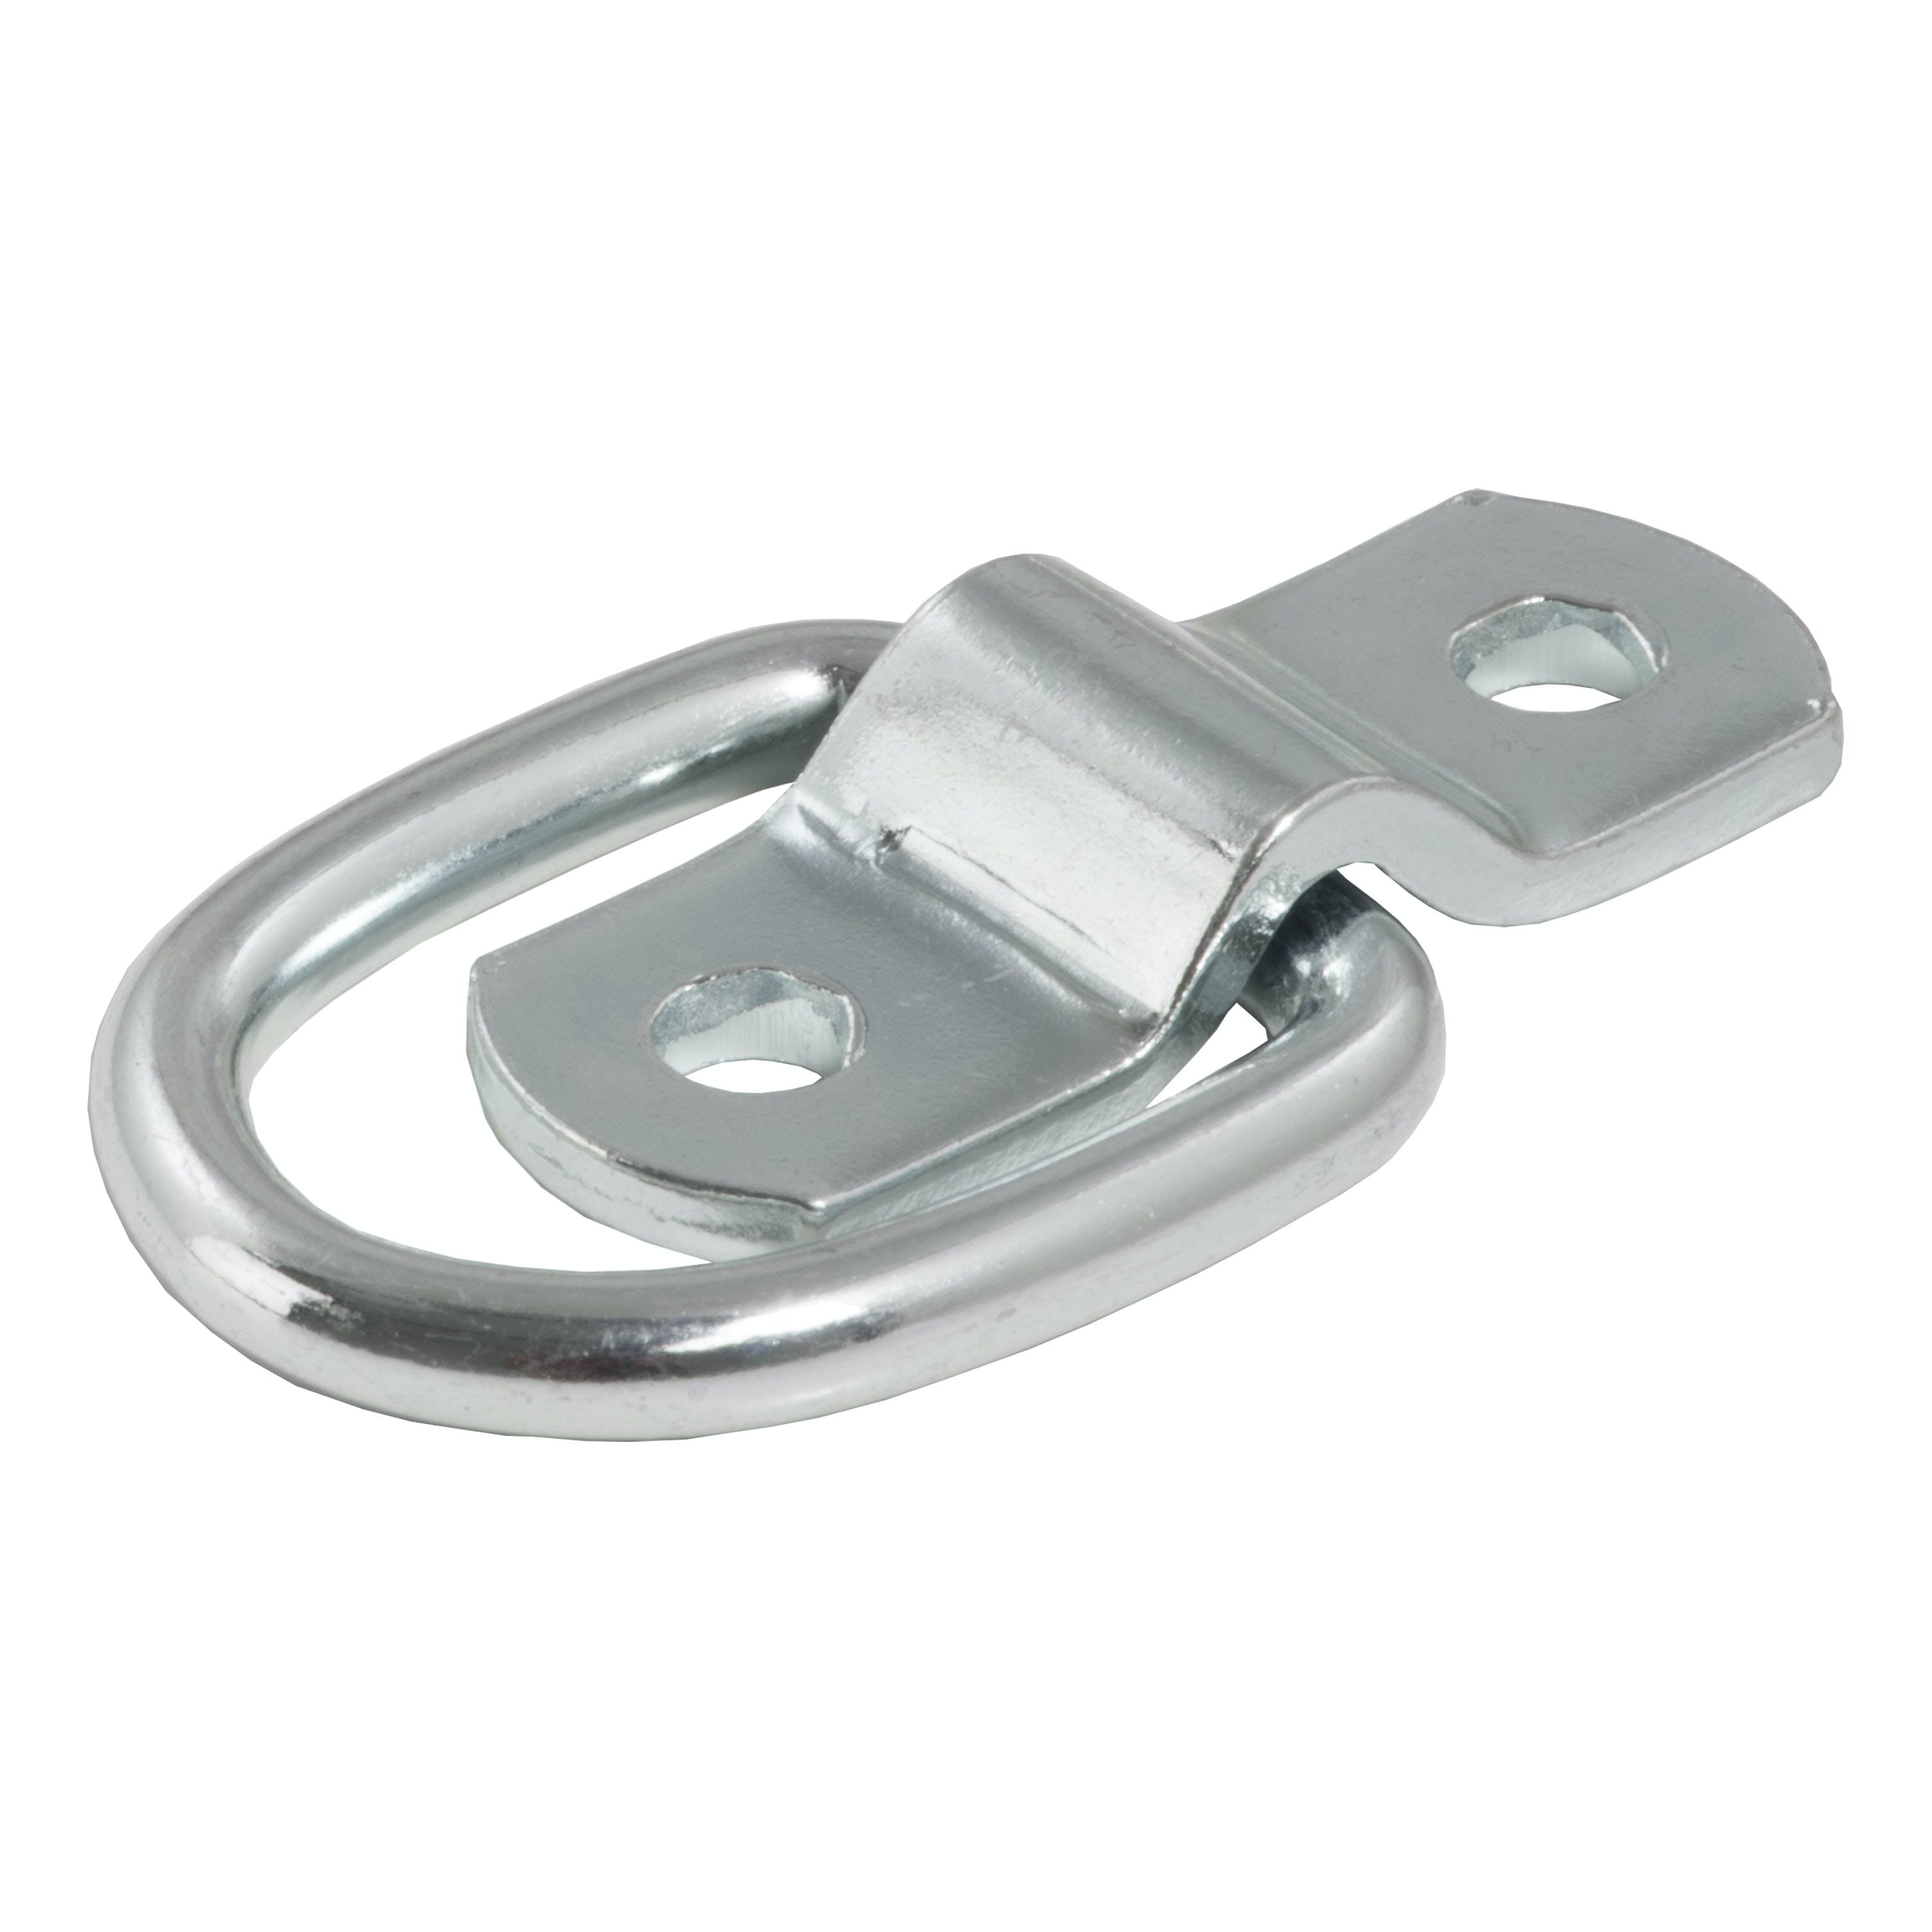 CURT 83730 1 x 1-1/4 Surface-Mounted Tie-Down D-Ring (1,200 lbs, Clear Zinc)